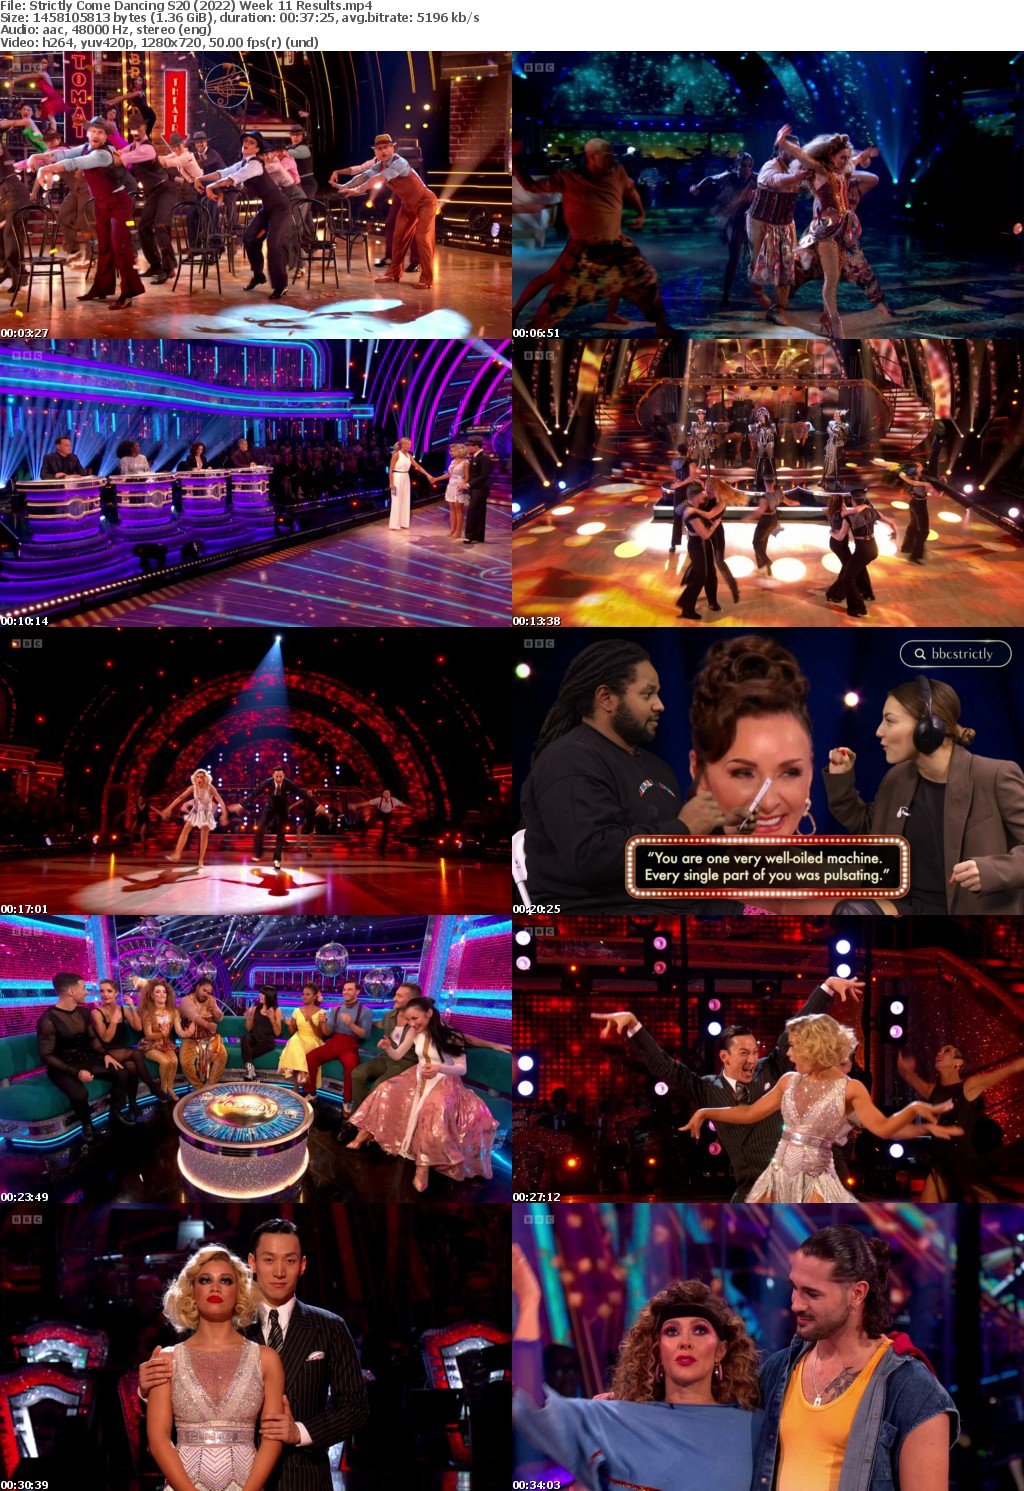 Strictly Come Dancing S20 (2022) Week 11 Results (1280x720p HD, 50fps, soft Eng subs)